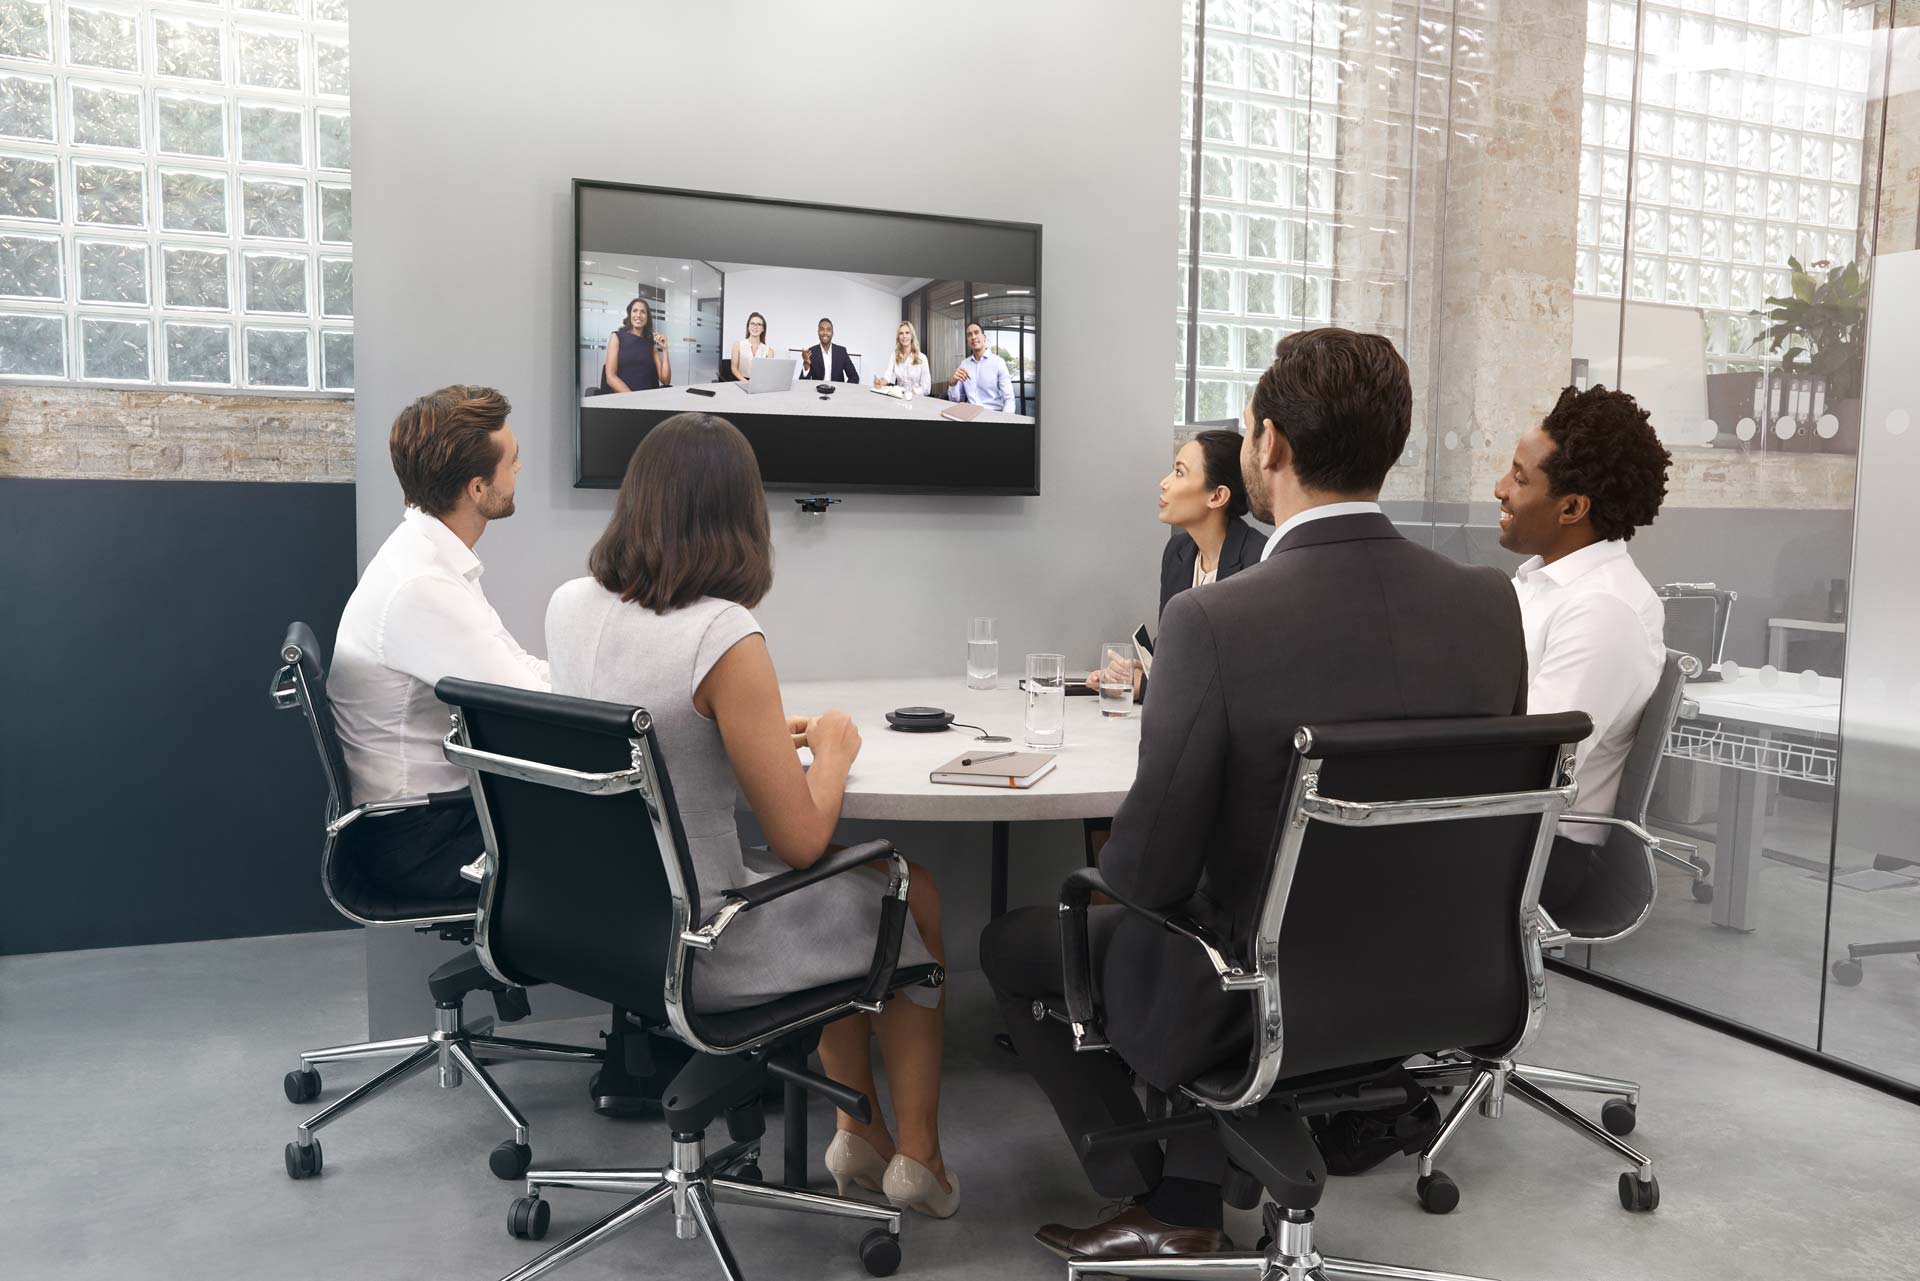 An image of a full huddle room with five workers video conferencing in front of the PanaCast camera with a Jabra Speak 750 conferencing speaker.